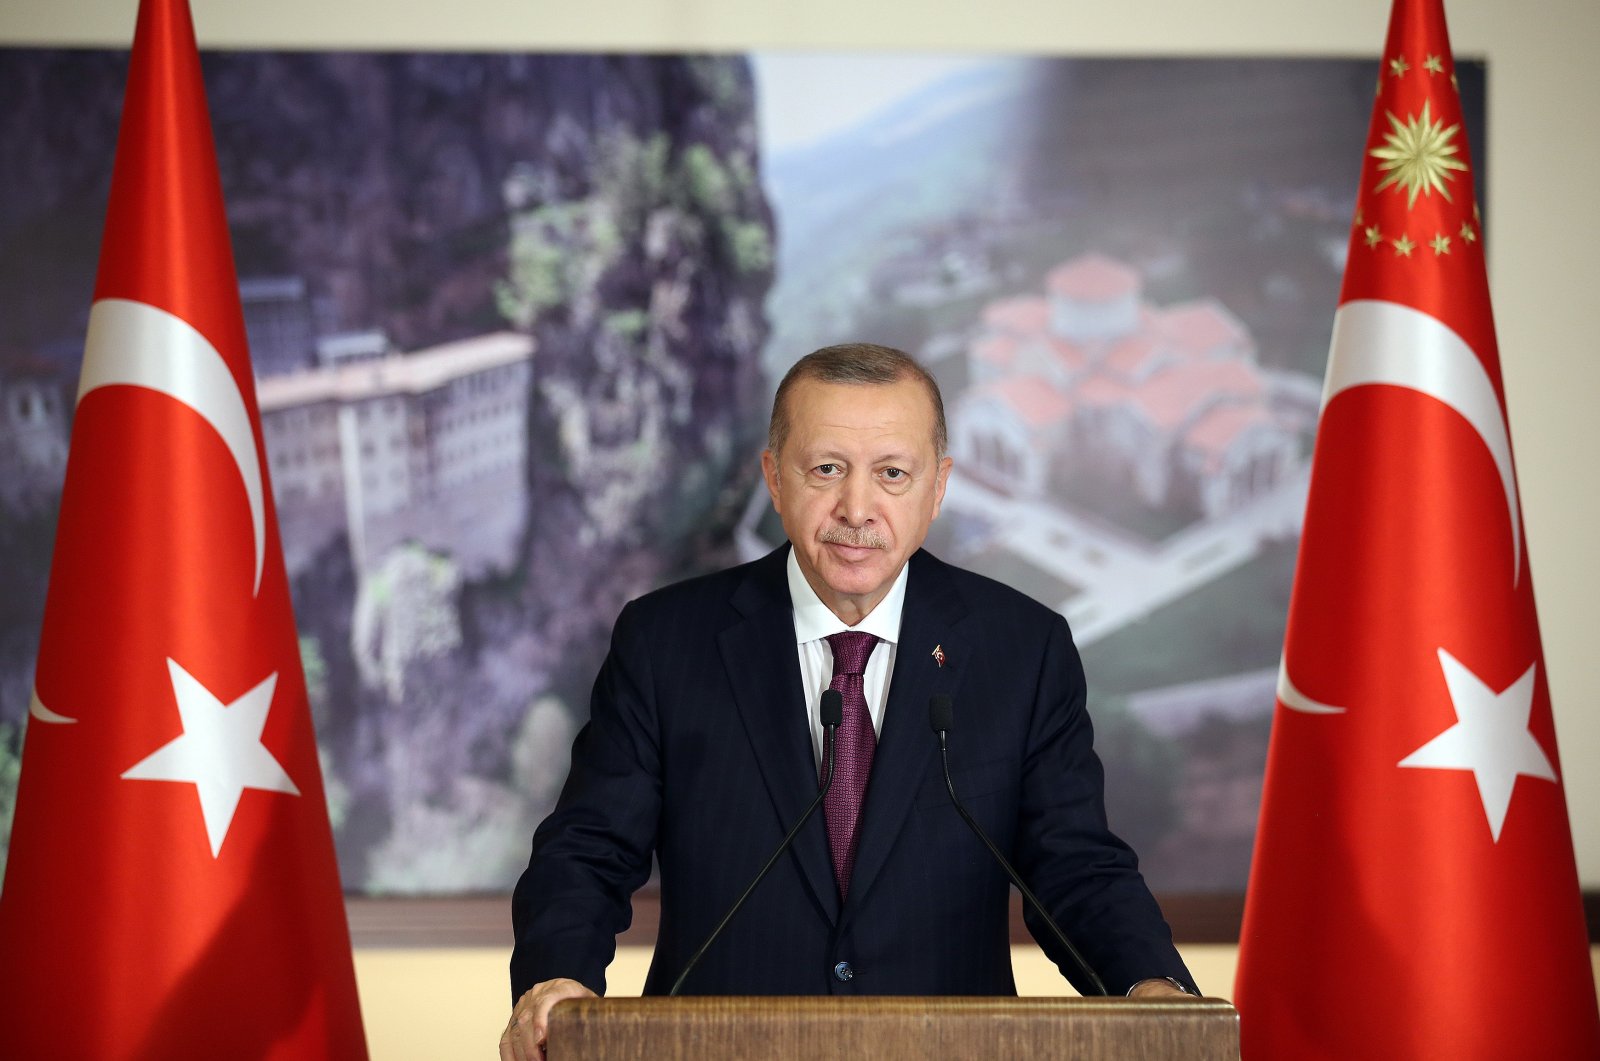 President Recep Tayyip Erdoğan speaks at the opening ceremony of the Sümela Monastery in Turkey's northern Trabzon province via teleconference from another location, July 29, 2020. (AA Photo)